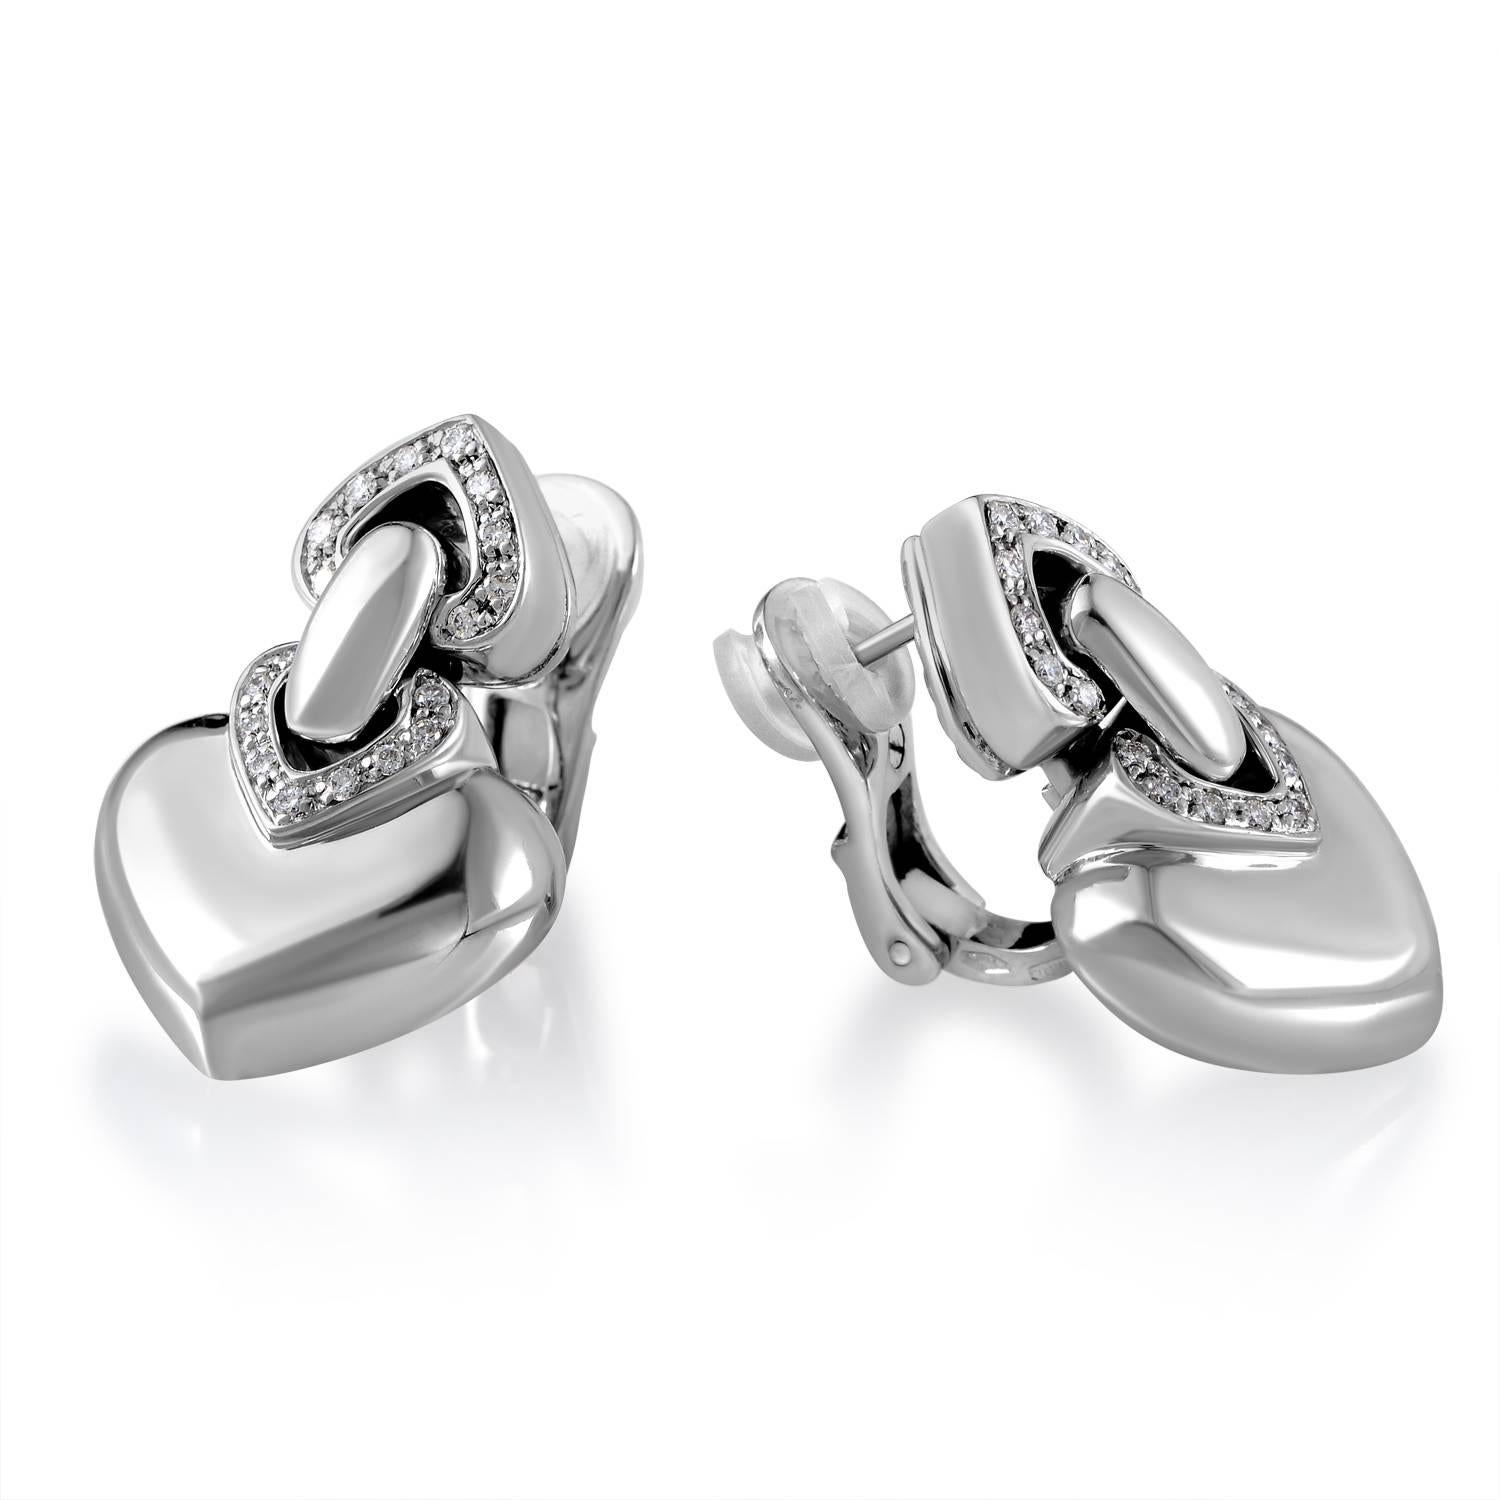 Lovely and chic, these elegant Bvlgari earrings are made of tasteful 18K white gold and boast charming heart-shaped design accentuated with 0.40ct of splendid diamonds for a graceful touch of luxury.<br />Earring Thickness: 4mm